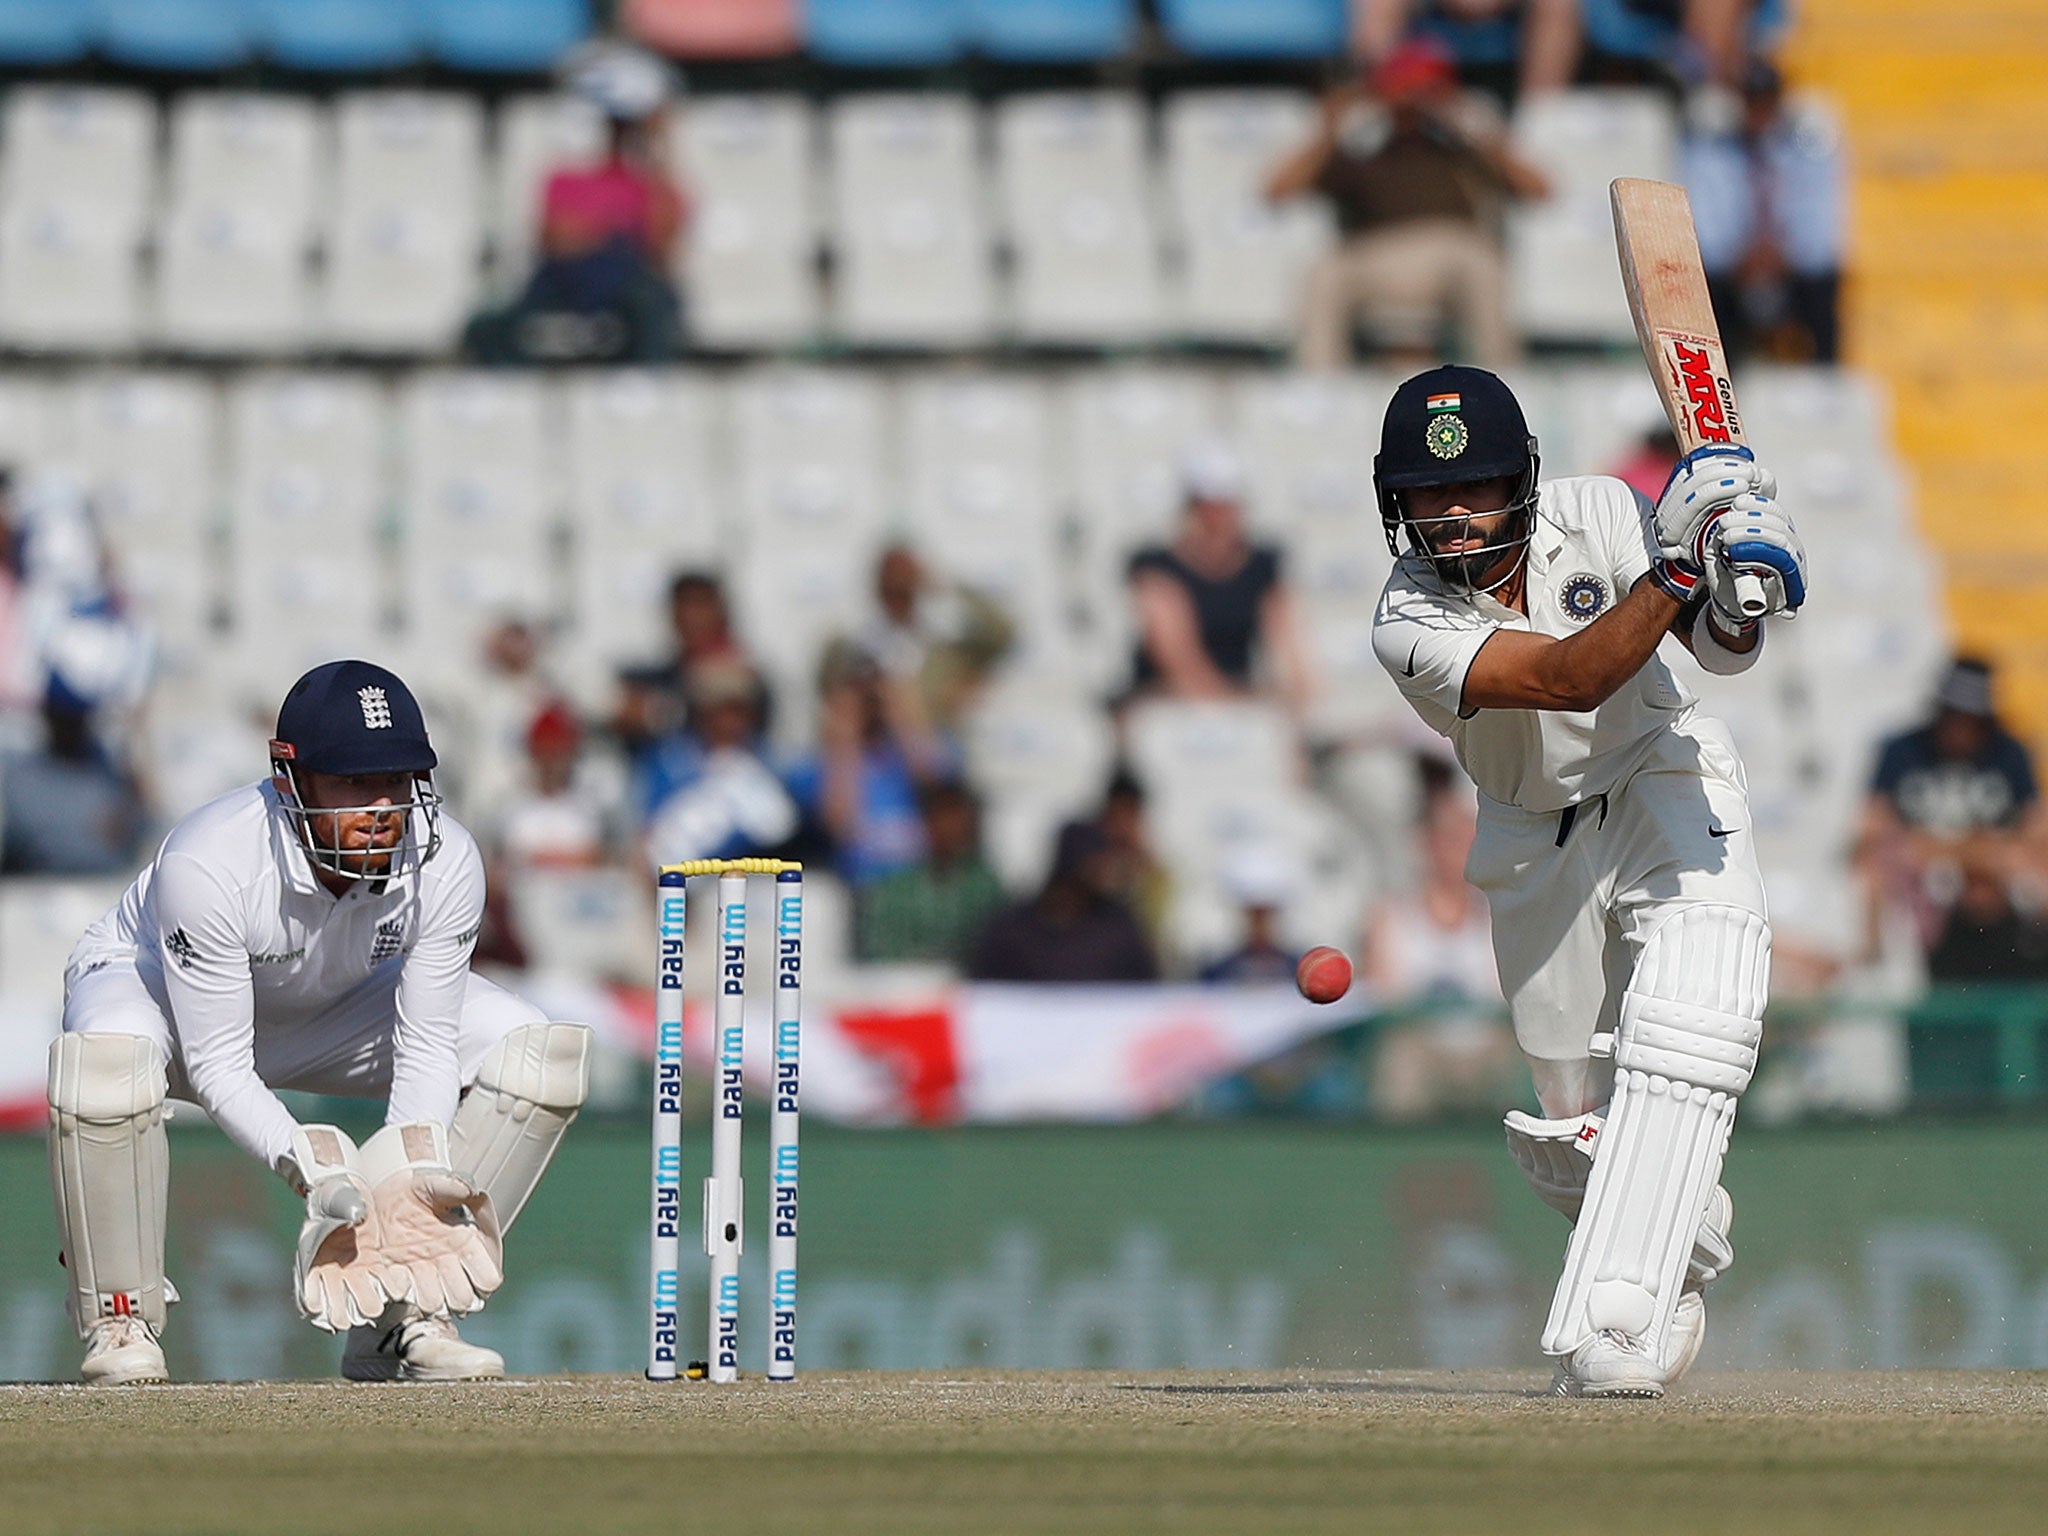 India's captain Virat Kohli plays a shot on the second day of their third cricket test match against England in Mohali